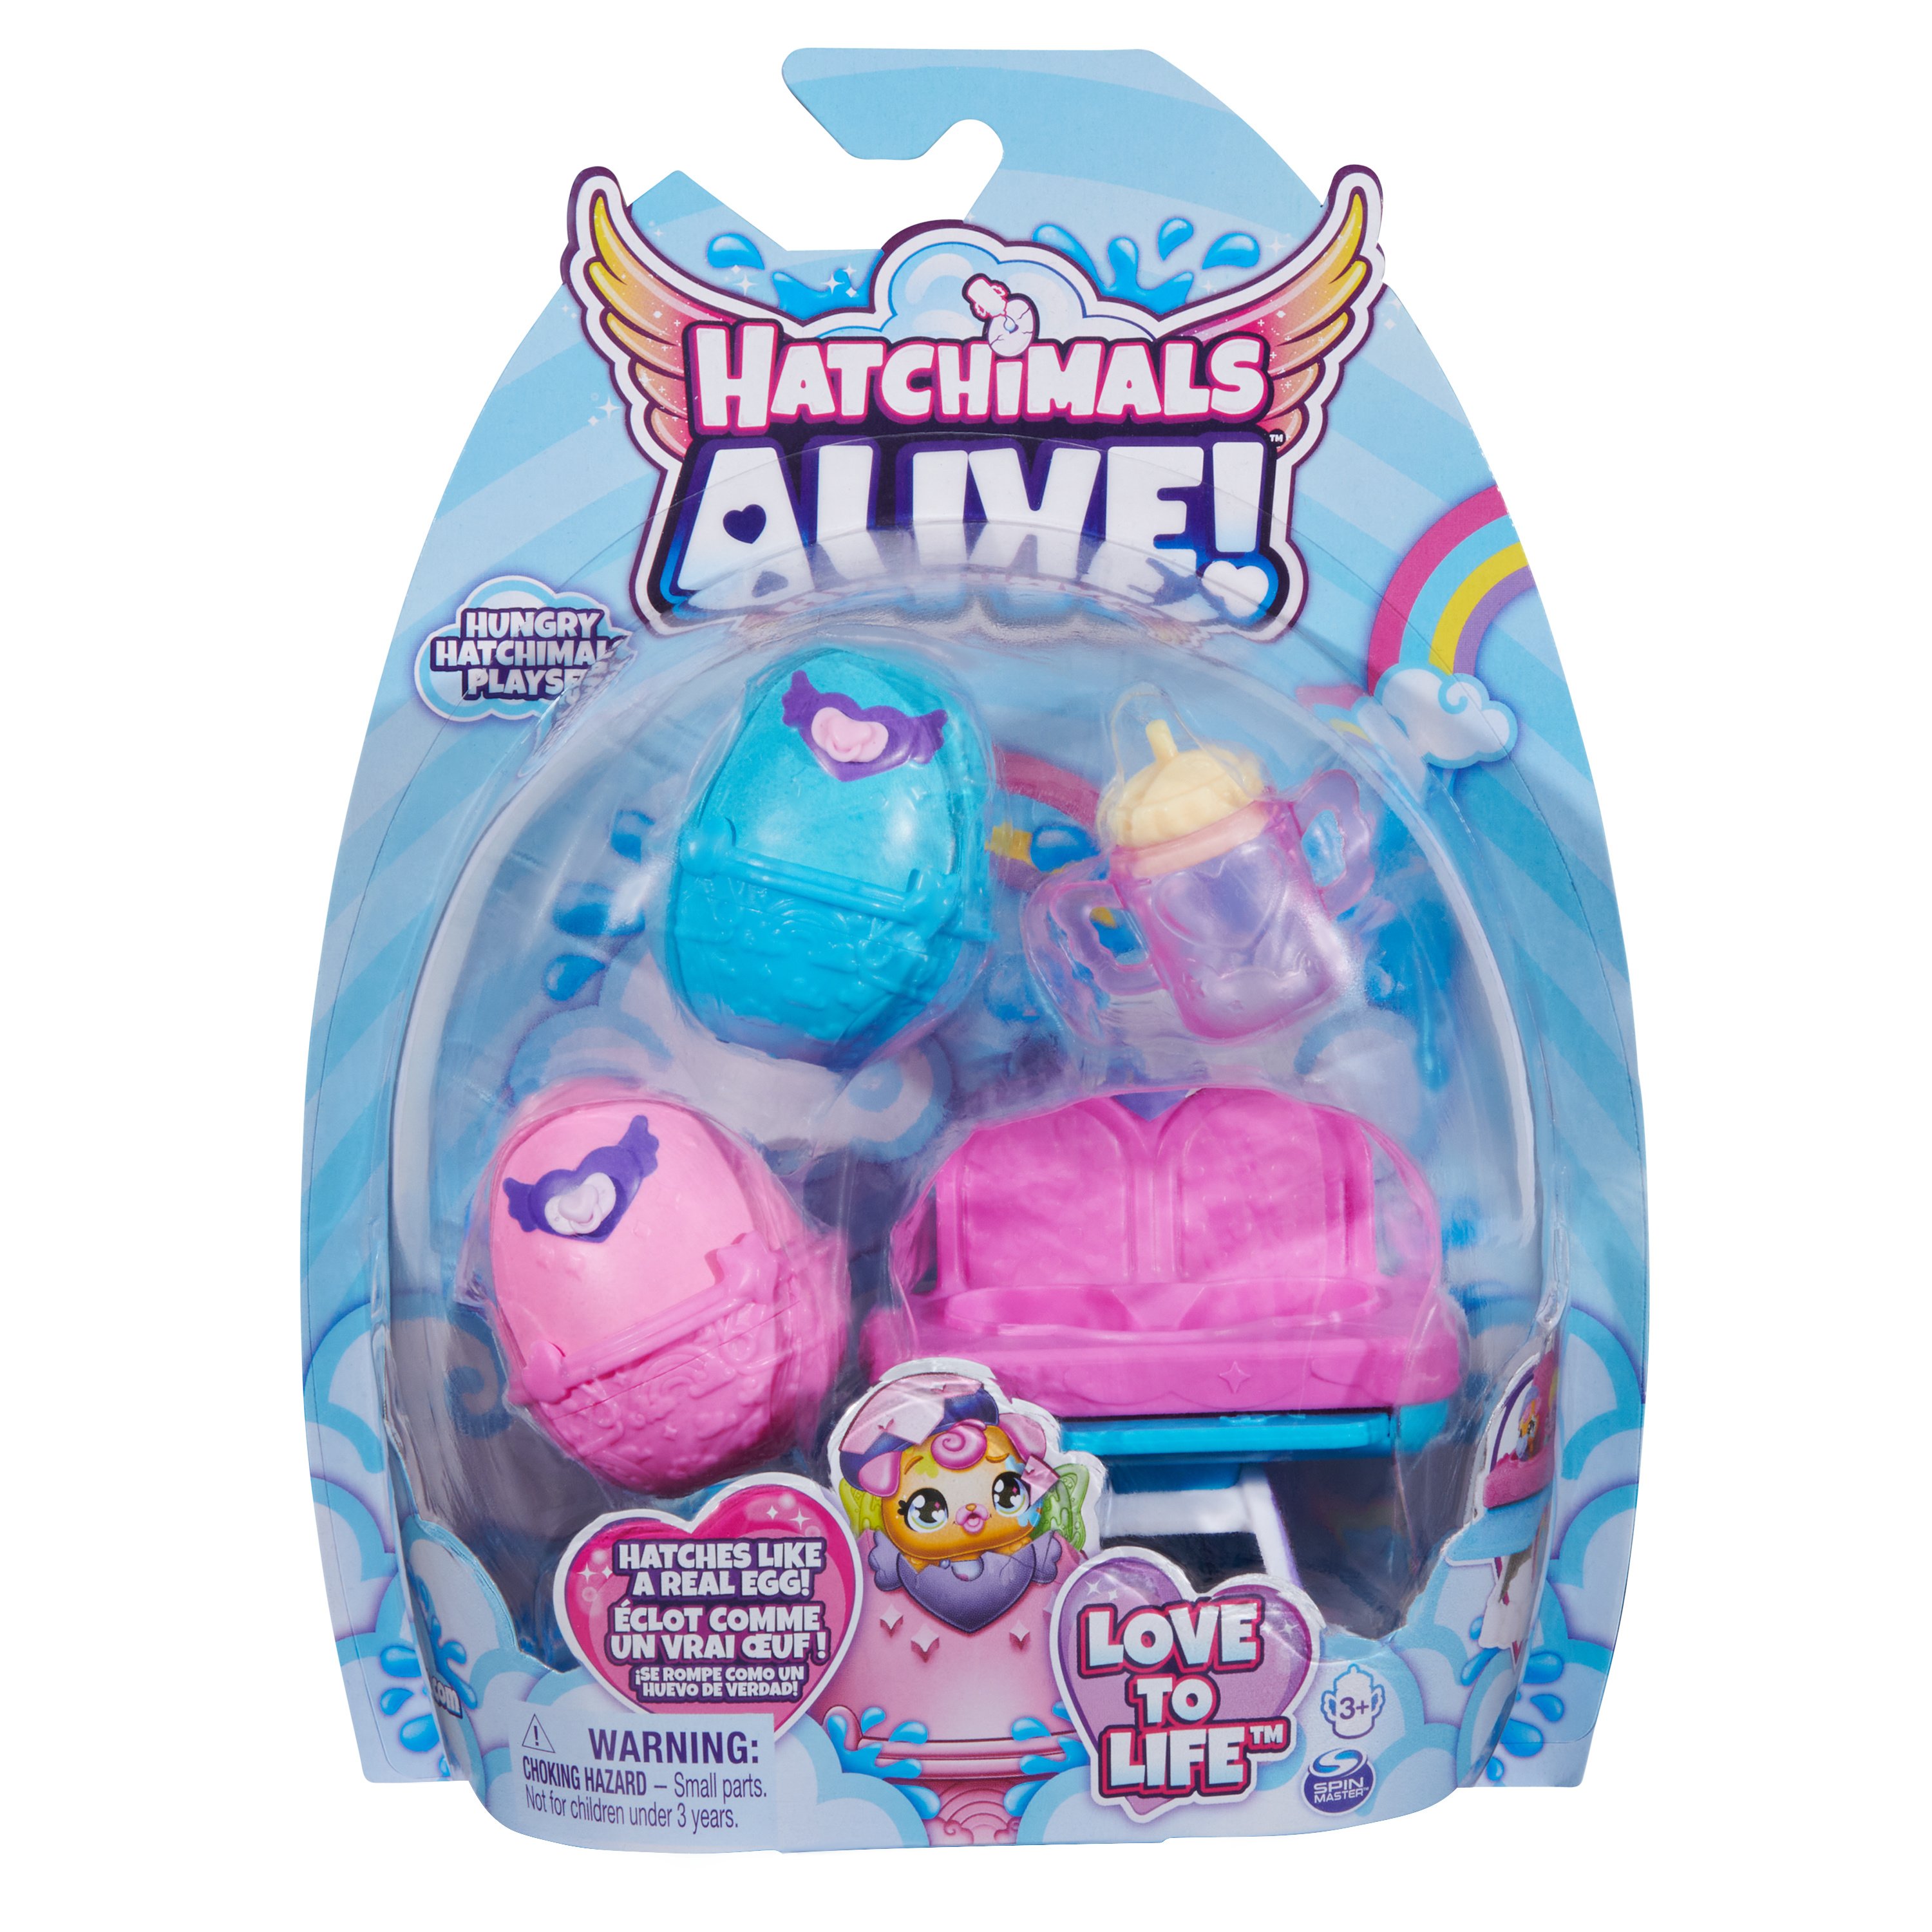 Buy Hatchimals Alive, Egg Carton Toy with 5 Mini Figures in Self-Hatching  Eggs